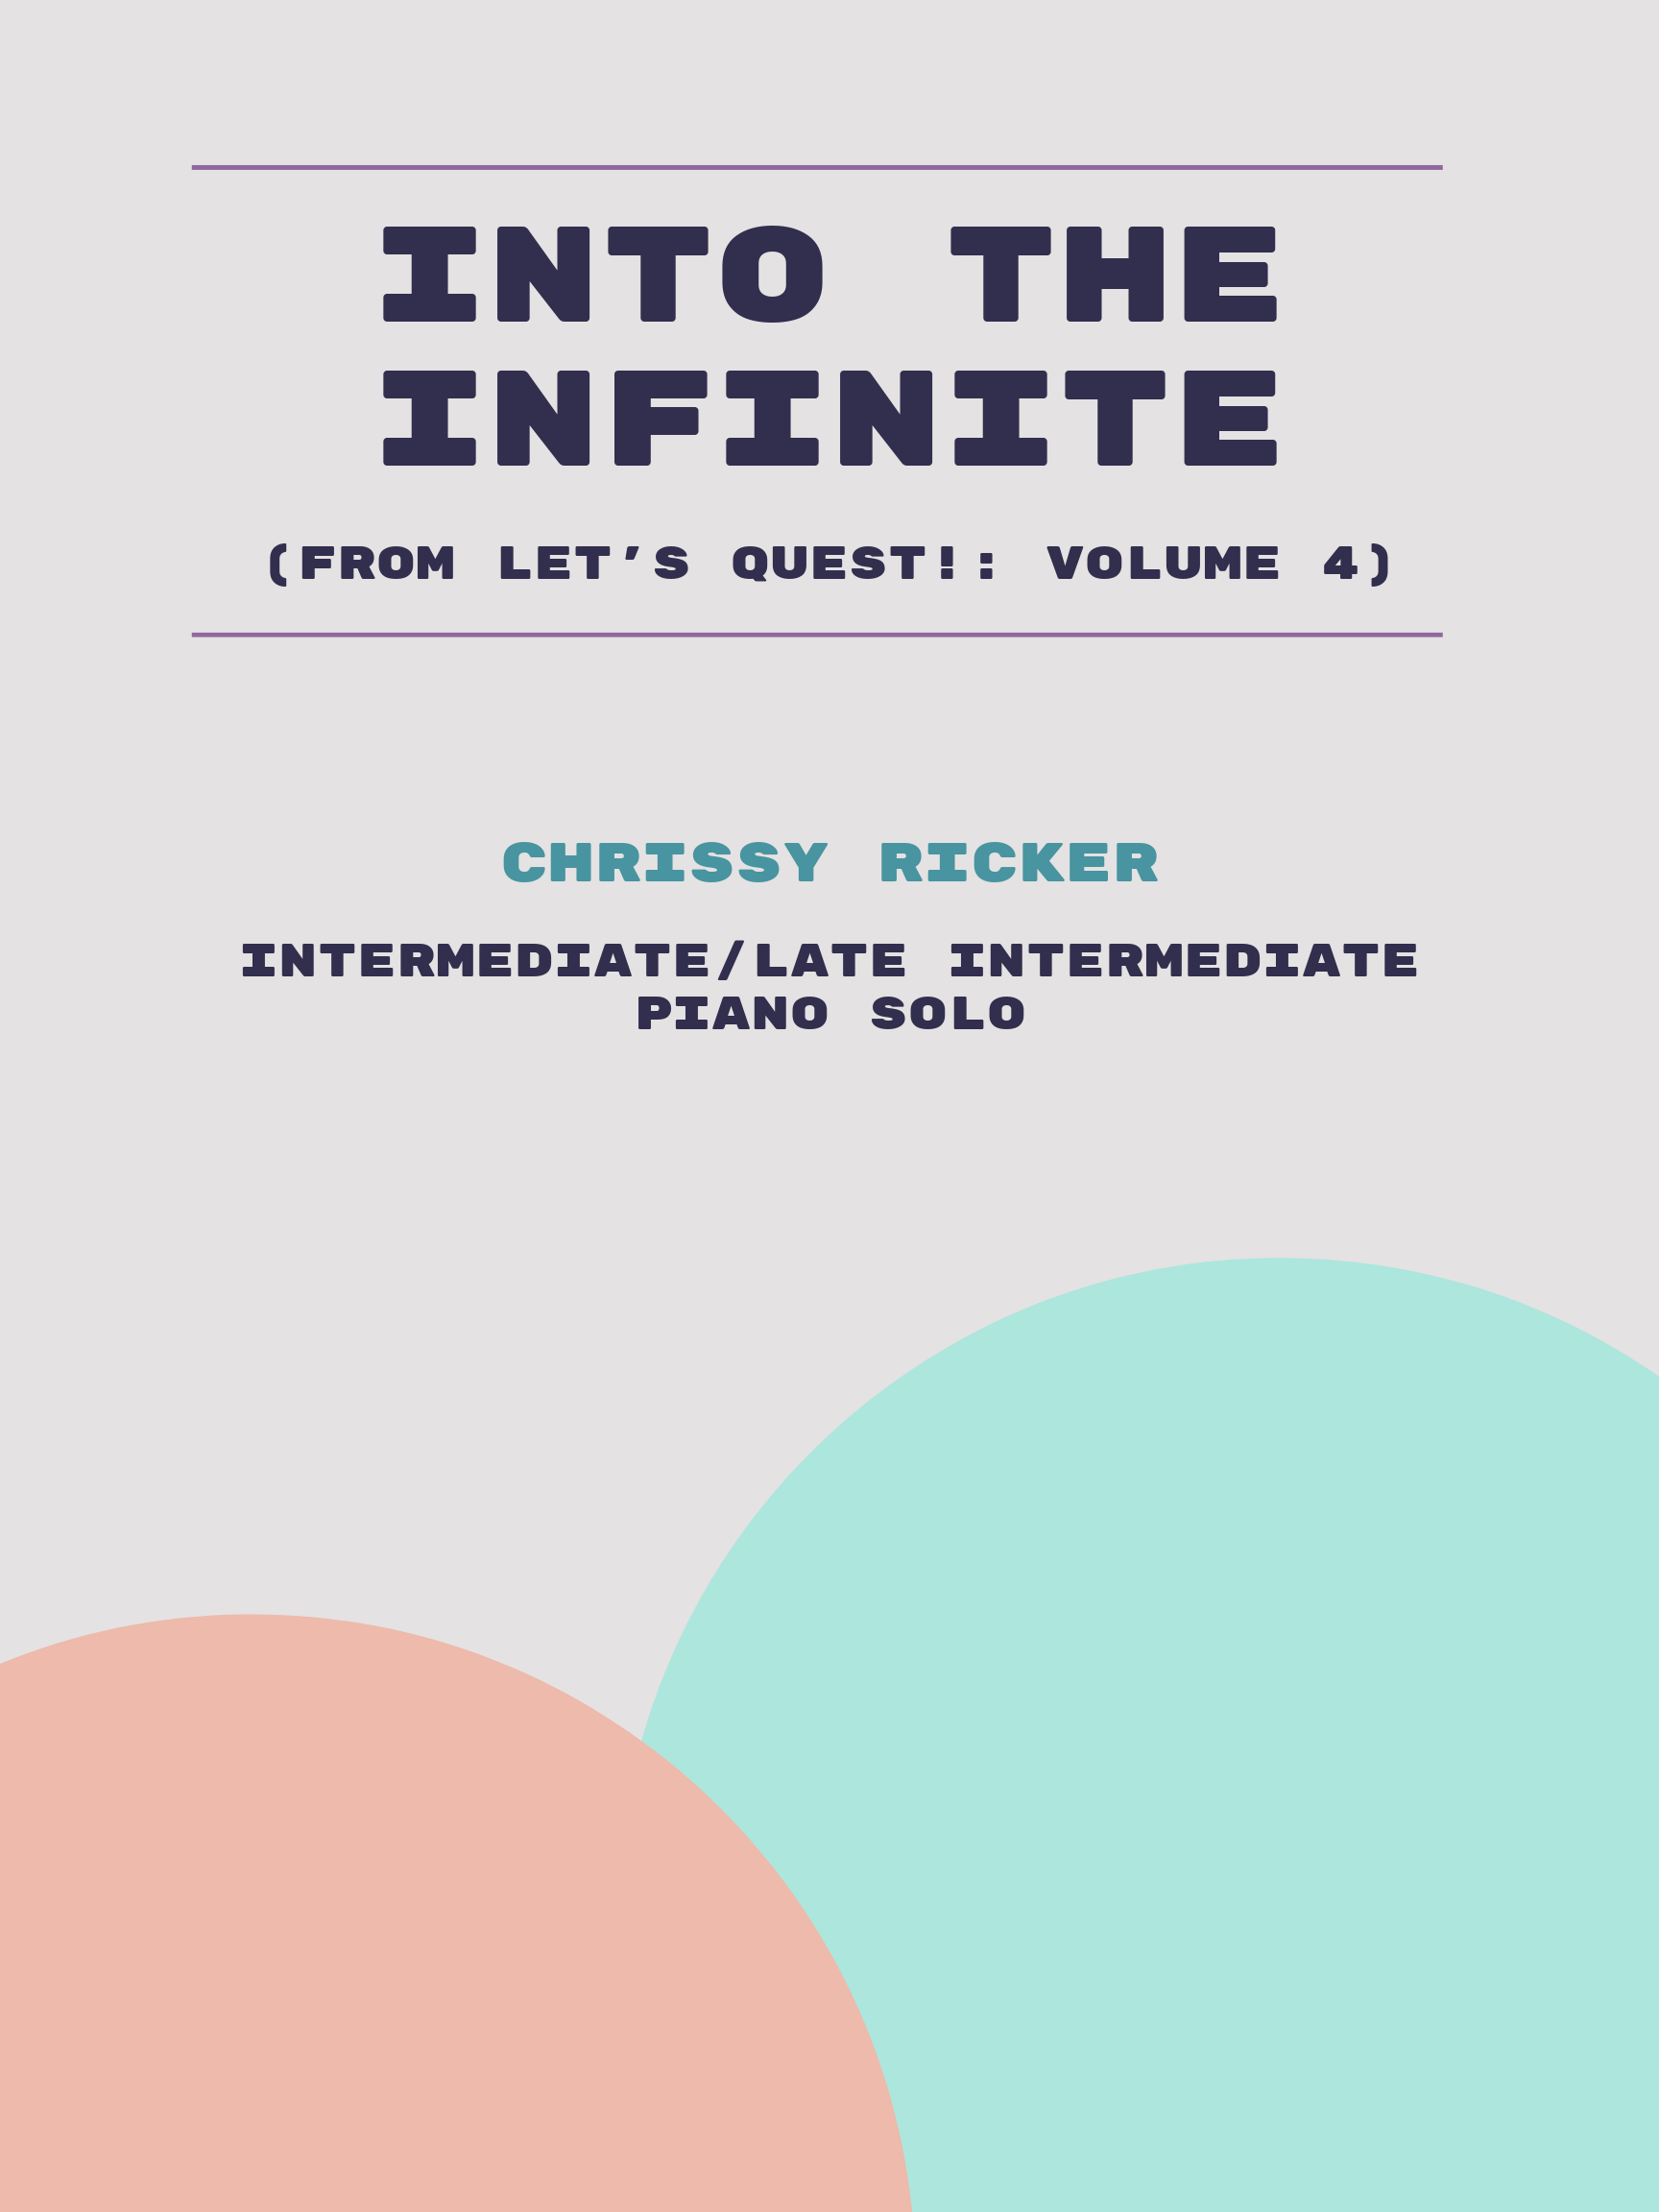 Into the Infinite by Chrissy Ricker